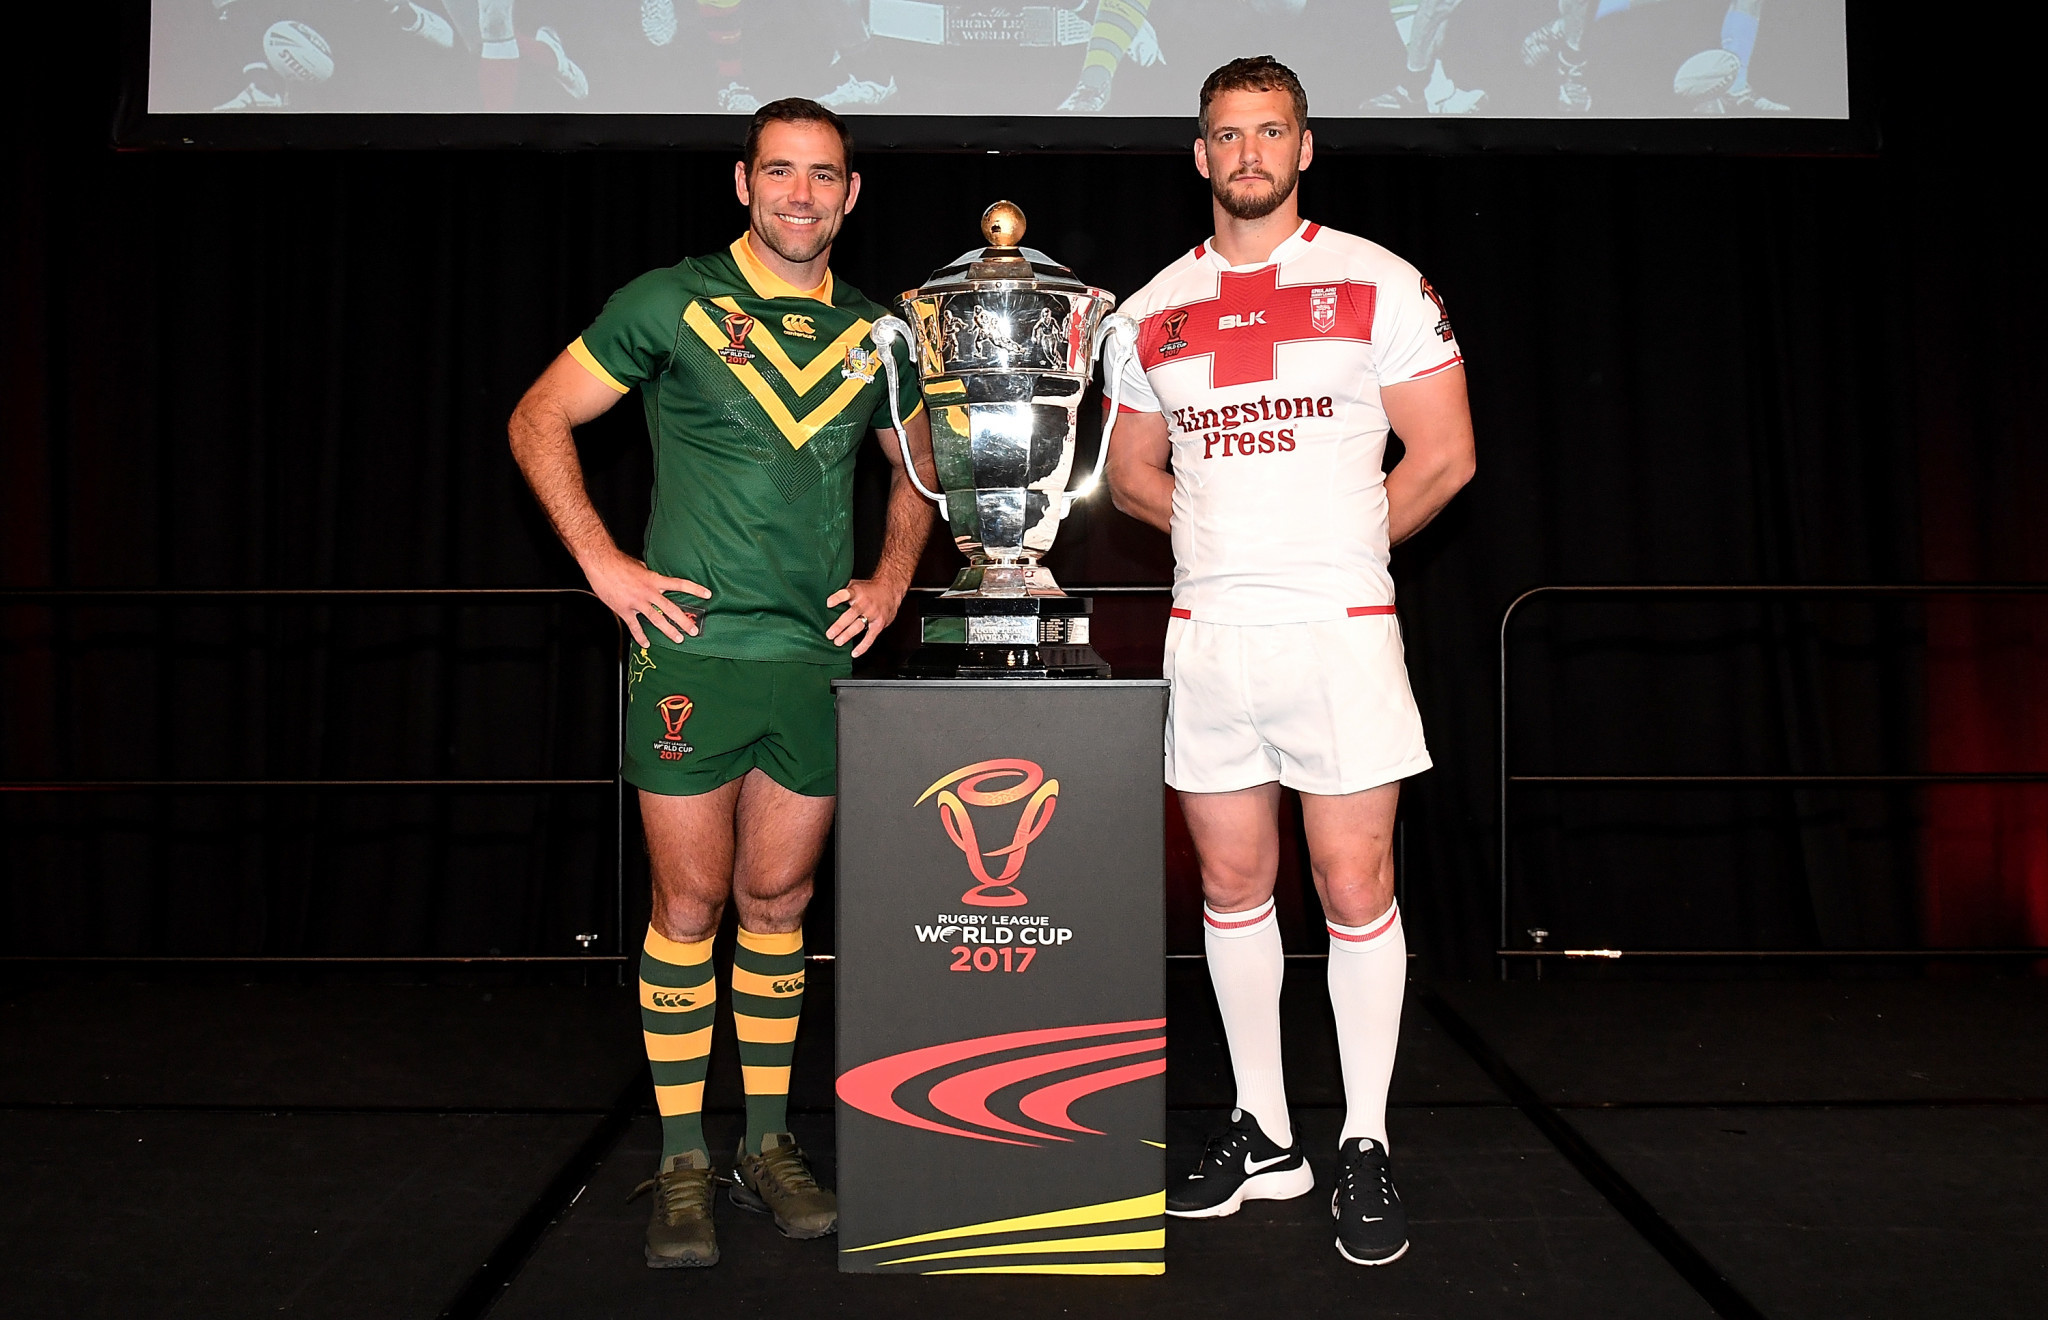 Australia captain Cameron Smith, left, and England counterpart Sean O'Loughlin, right, pose with the Rugby League World Cup trophy at the official launch in Brisbane today ©Getty Images